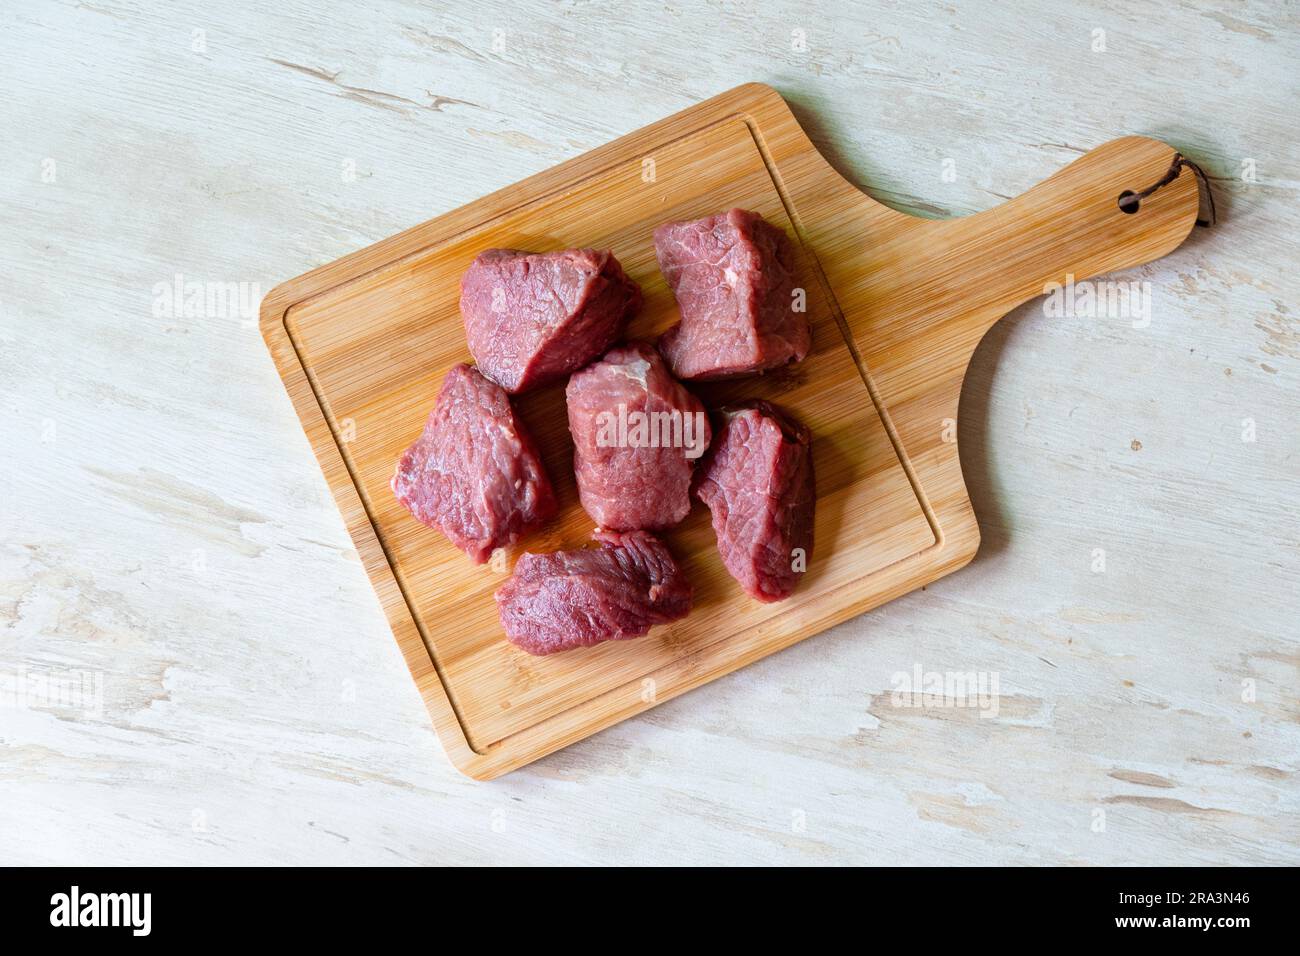 https://c8.alamy.com/comp/2RA3N46/raw-beef-meat-on-wooden-cutting-board-for-cooking-stew-or-other-meat-dish-on-white-background-top-view-2RA3N46.jpg